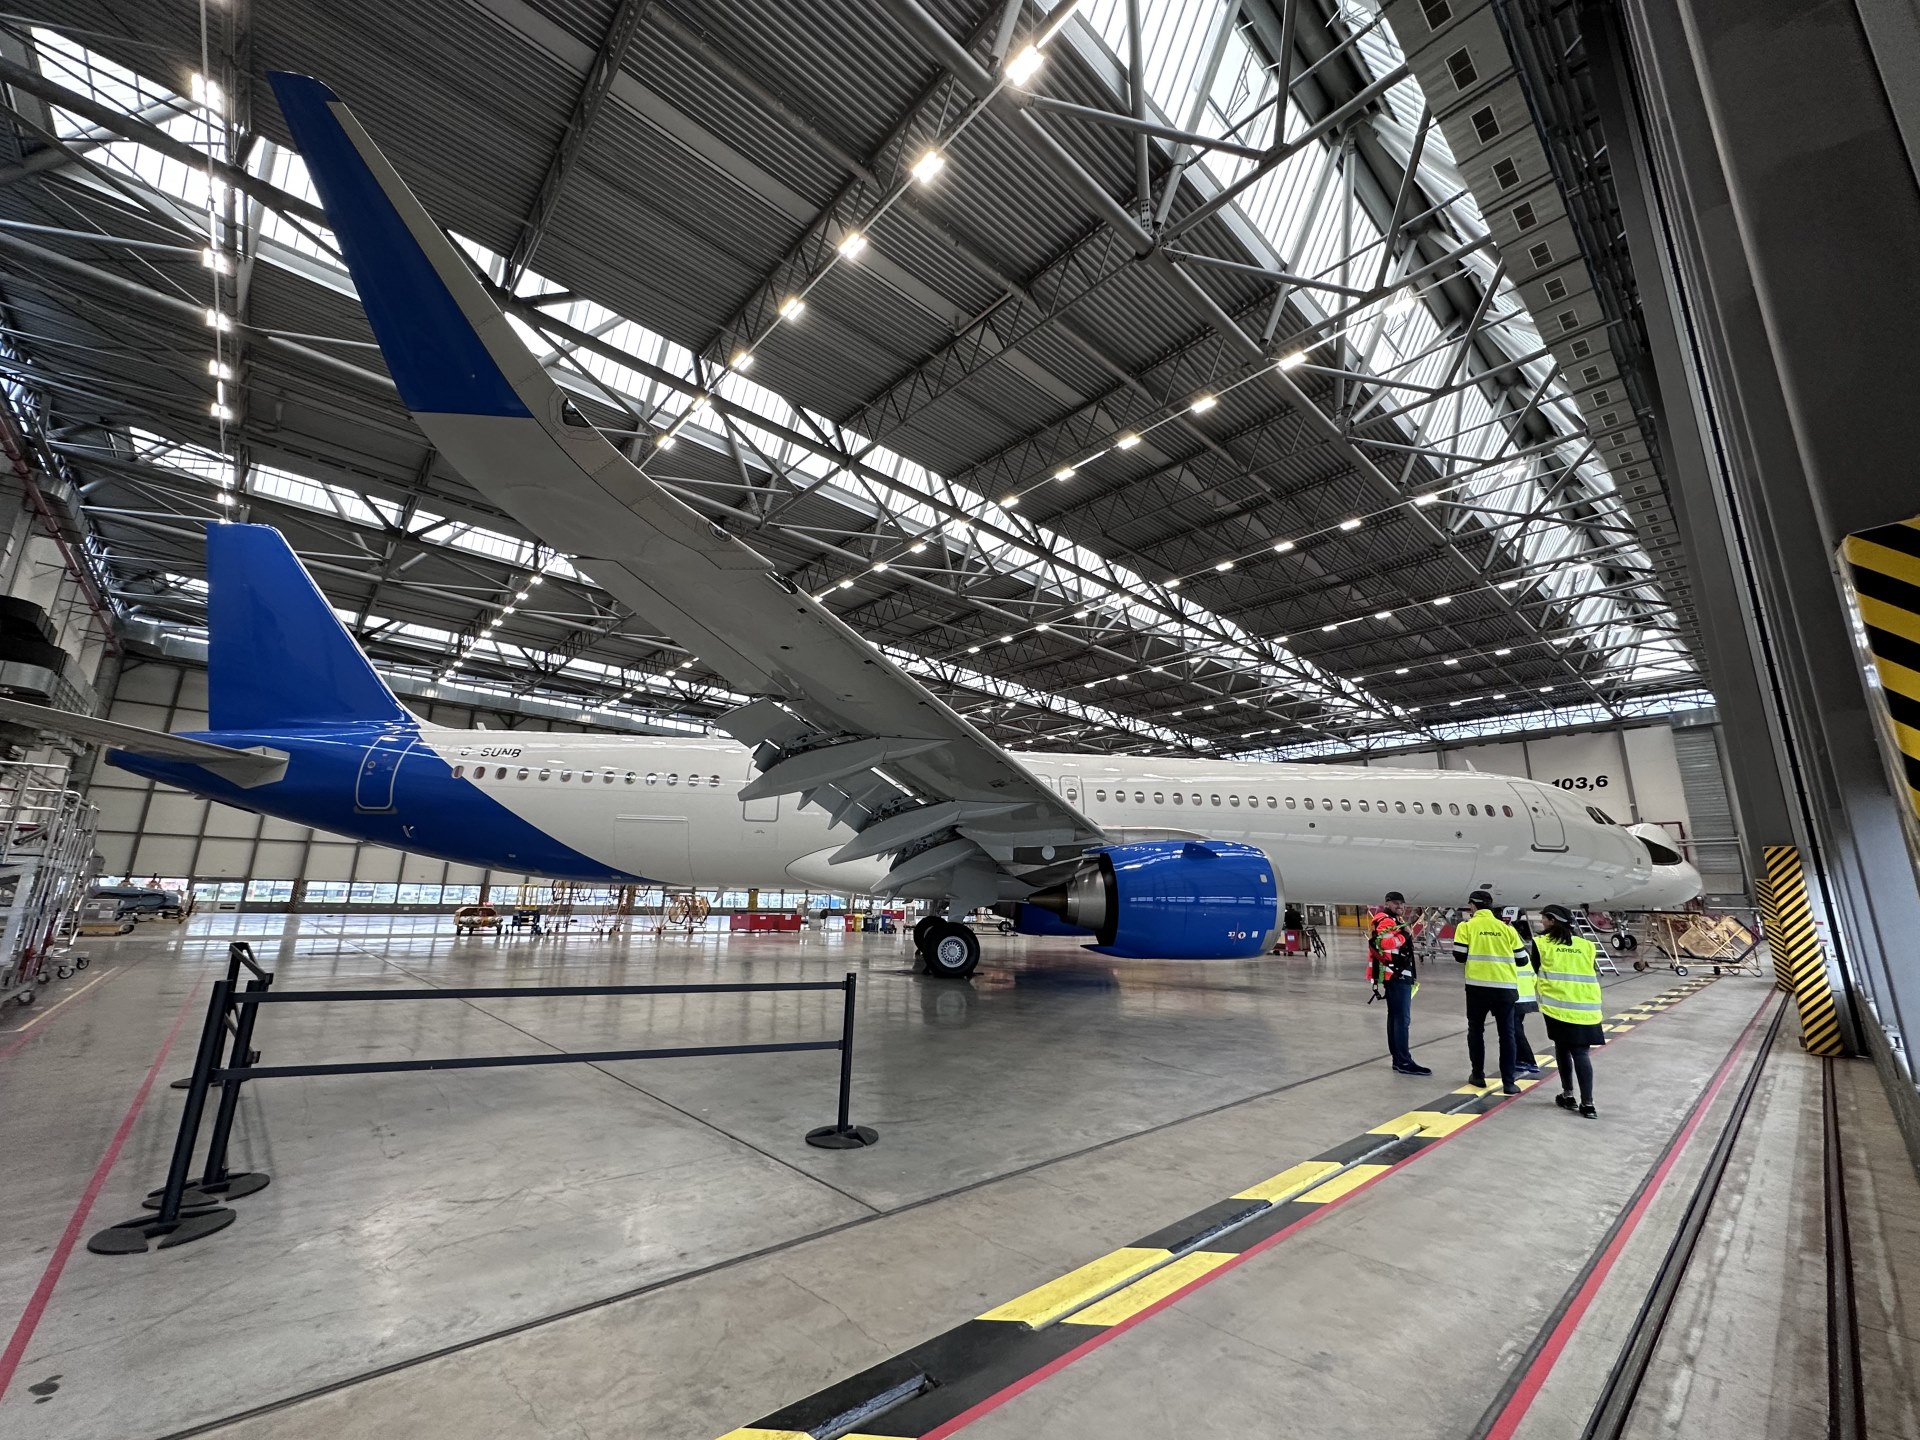 A new Jet2 Airbus A321neo in the hangar.